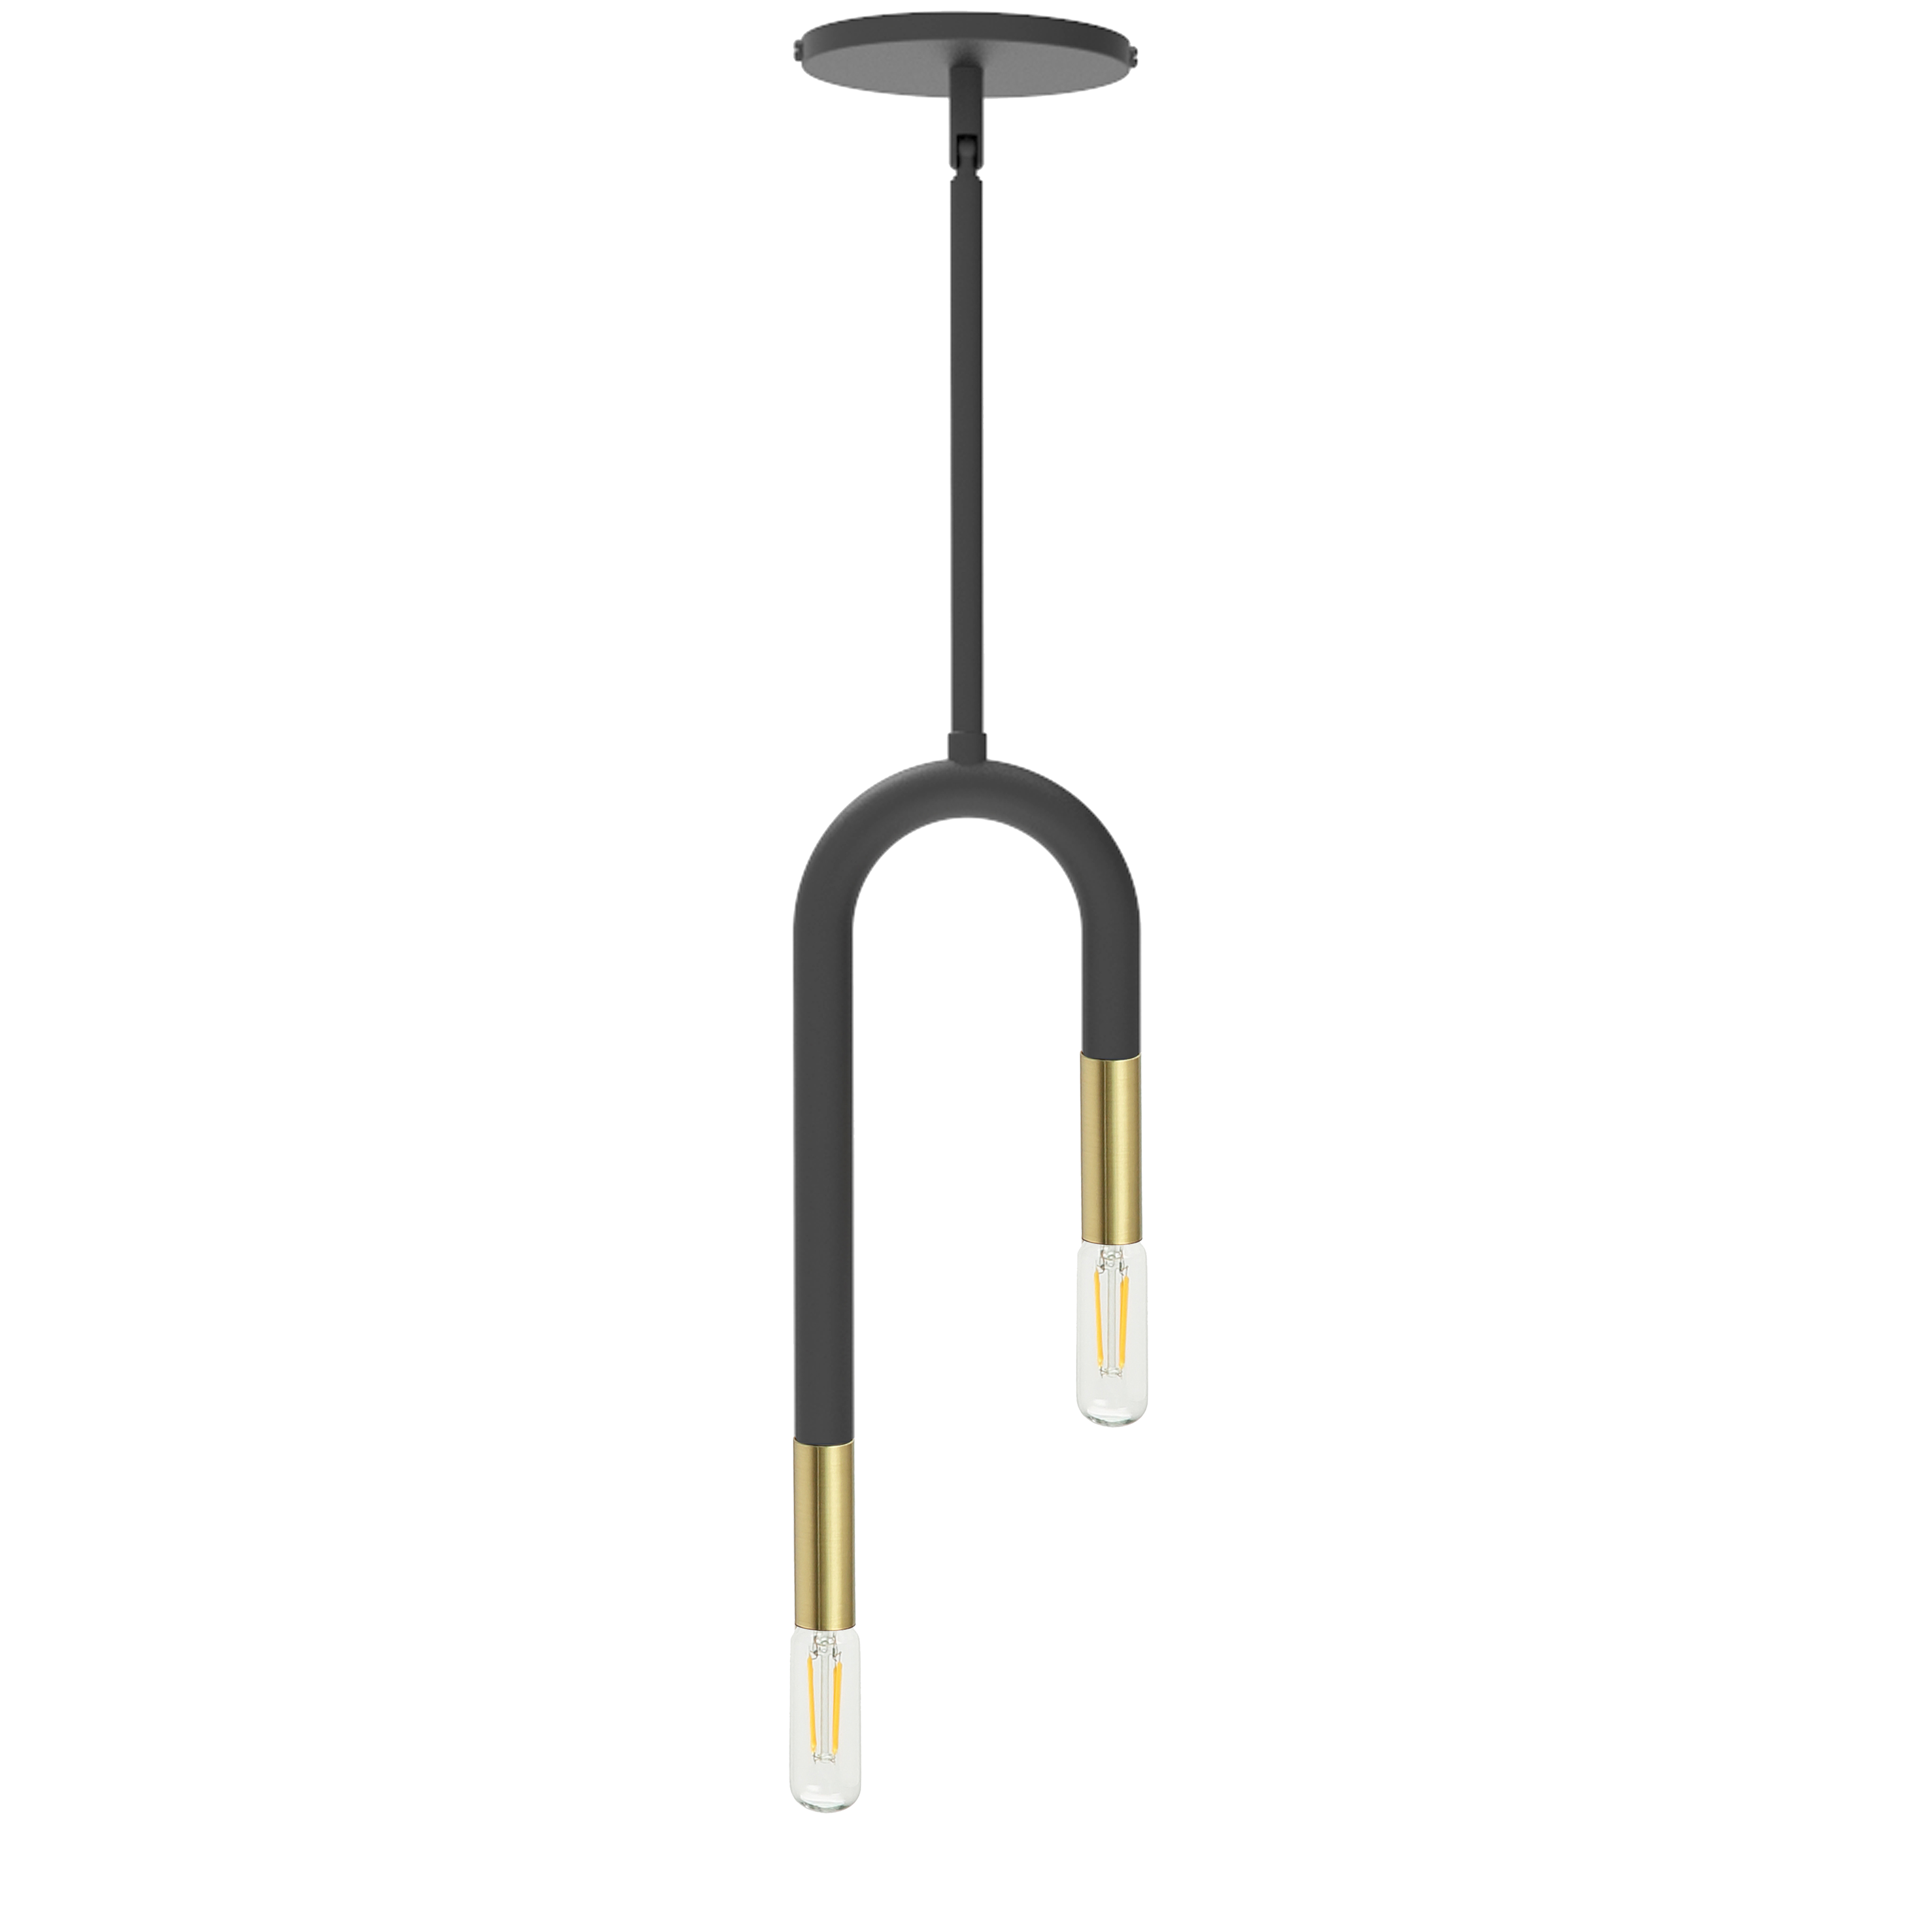 The Wand family of lighting is based on a beautifully simple concept  classic linear design. The look is modern, but with a nod to the traditional motifs of mid-century modernism and even early 20th century forms. The frame is crafted in metal with either straight or elegantly curved arms in stylish matte black finish with optional aged brass accents. It's a look with inherent drama and adds a note of undeniable luxury to your fashionable modern neutrals or bright palette. Wand lighting is versatile, and suitable for most rooms of your home from the foyer to bedroom.